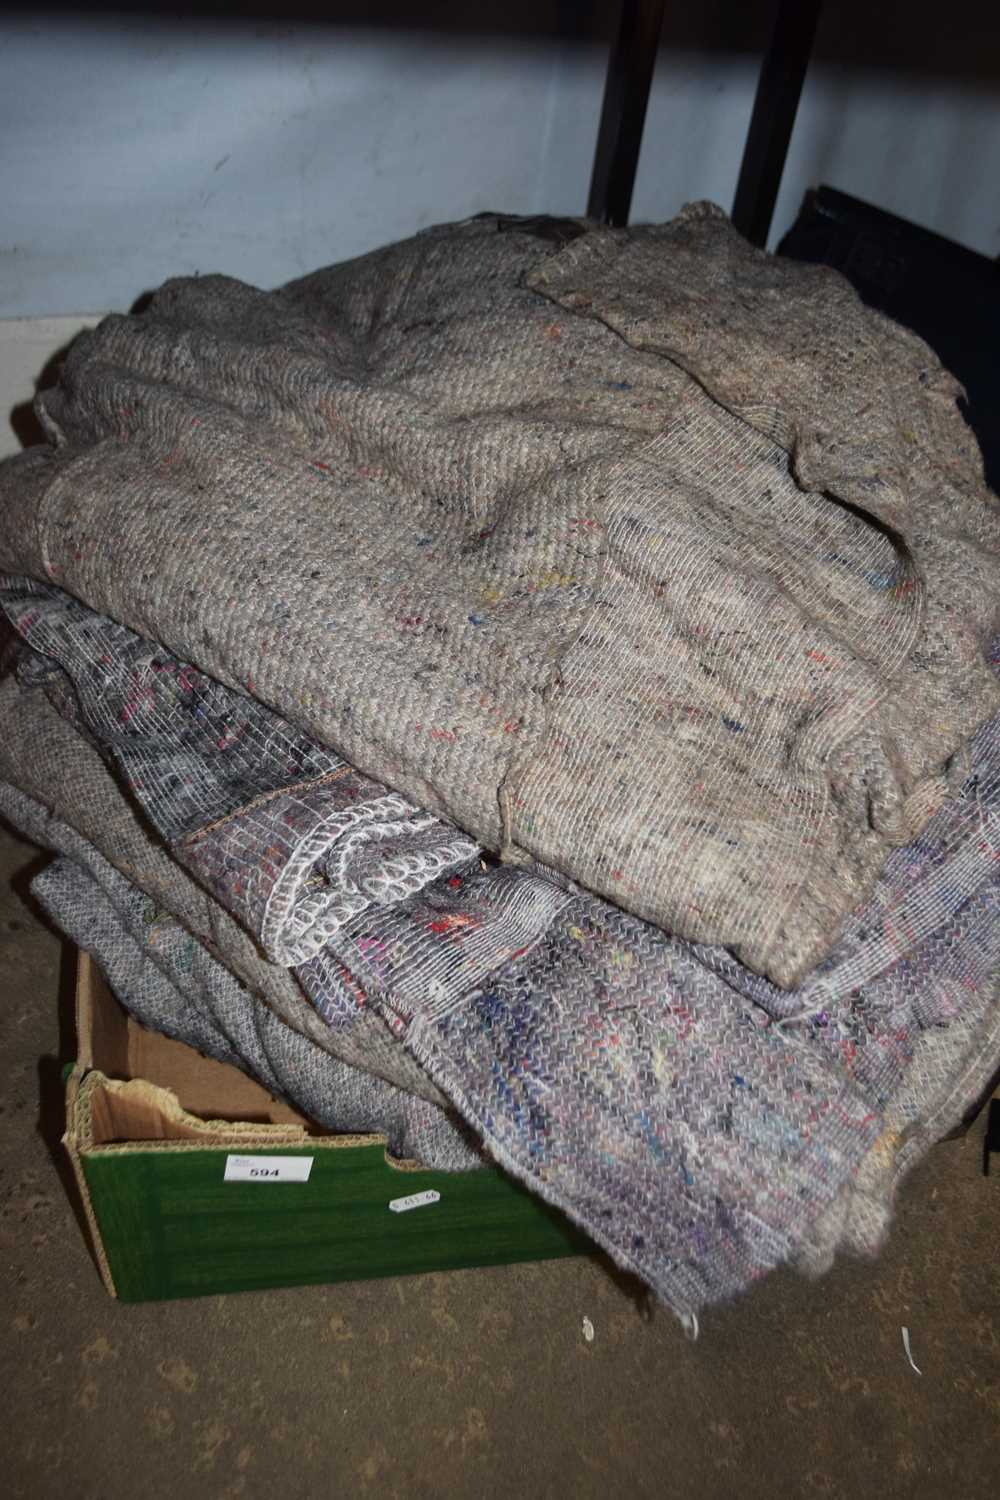 Quantity of assorted packing blankets